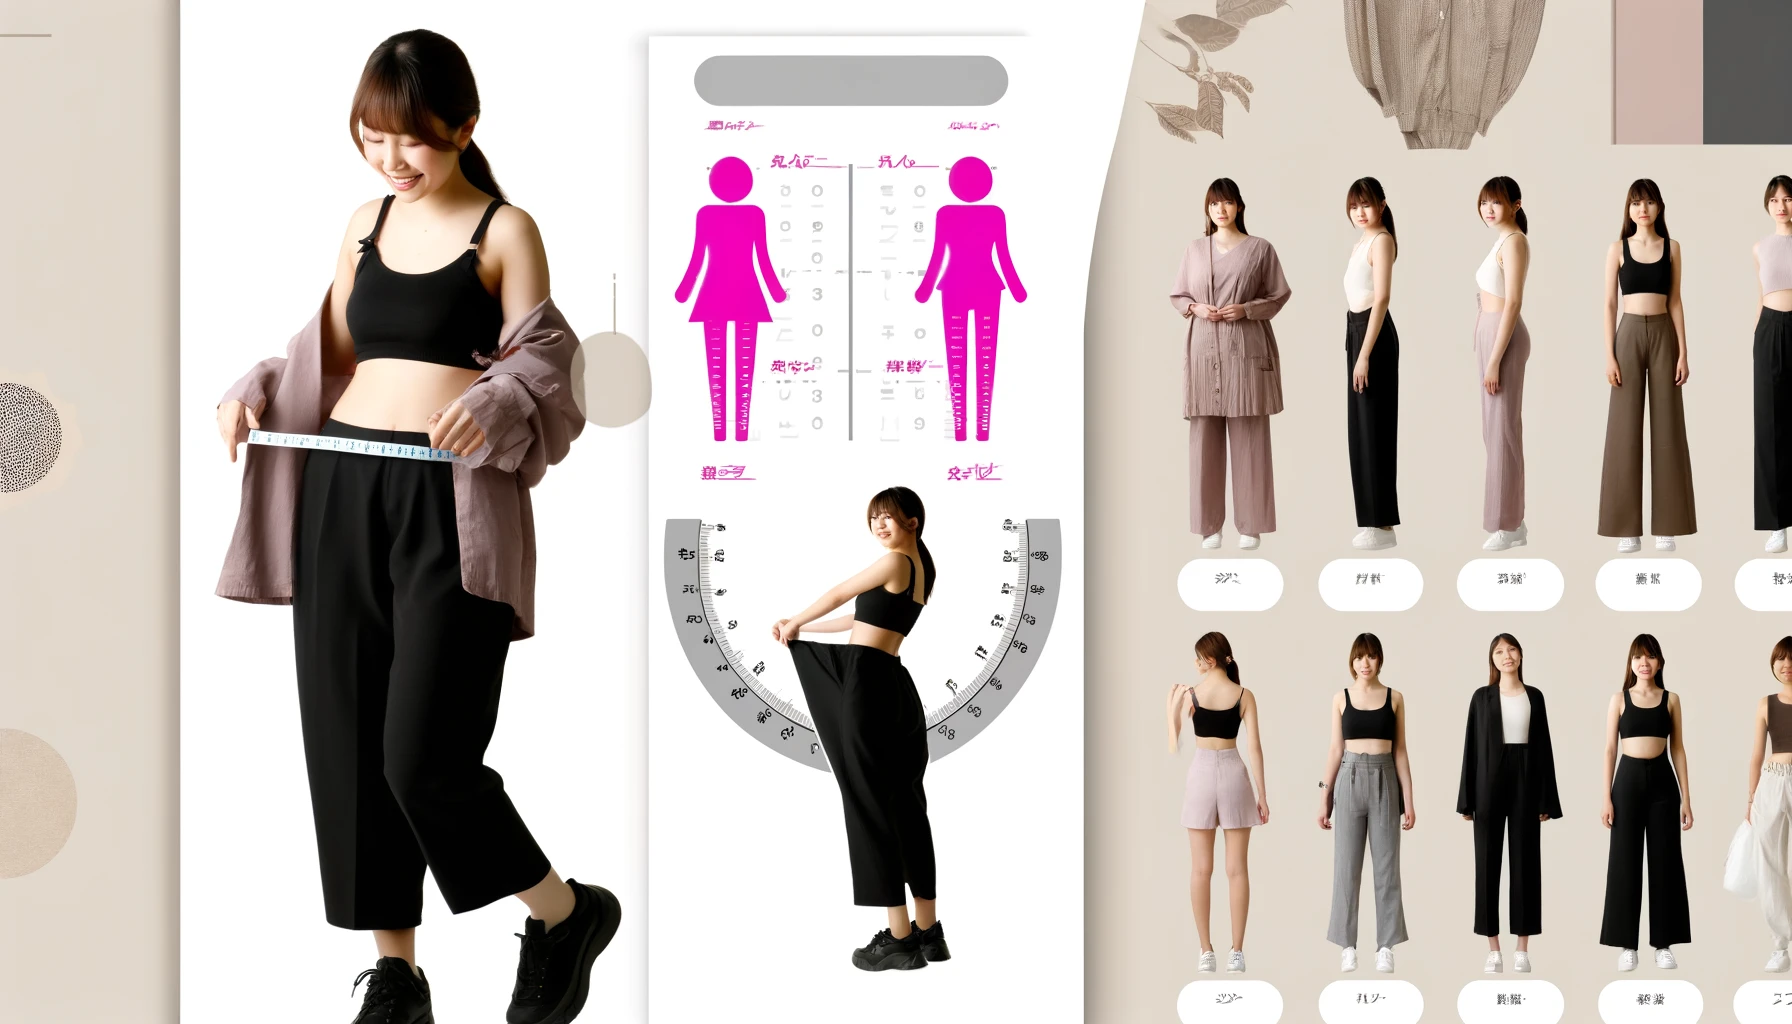 An image showing how to choose sizes for women's budget-friendly fashion brand GRL (Grail). The image features a stylish Japanese woman wearing trendy outfits from GRL. Various size charts and measurement tips are displayed, highlighting different body types and sizes. The background includes subtle design elements like fashion icons and a neutral, fashionable setting.